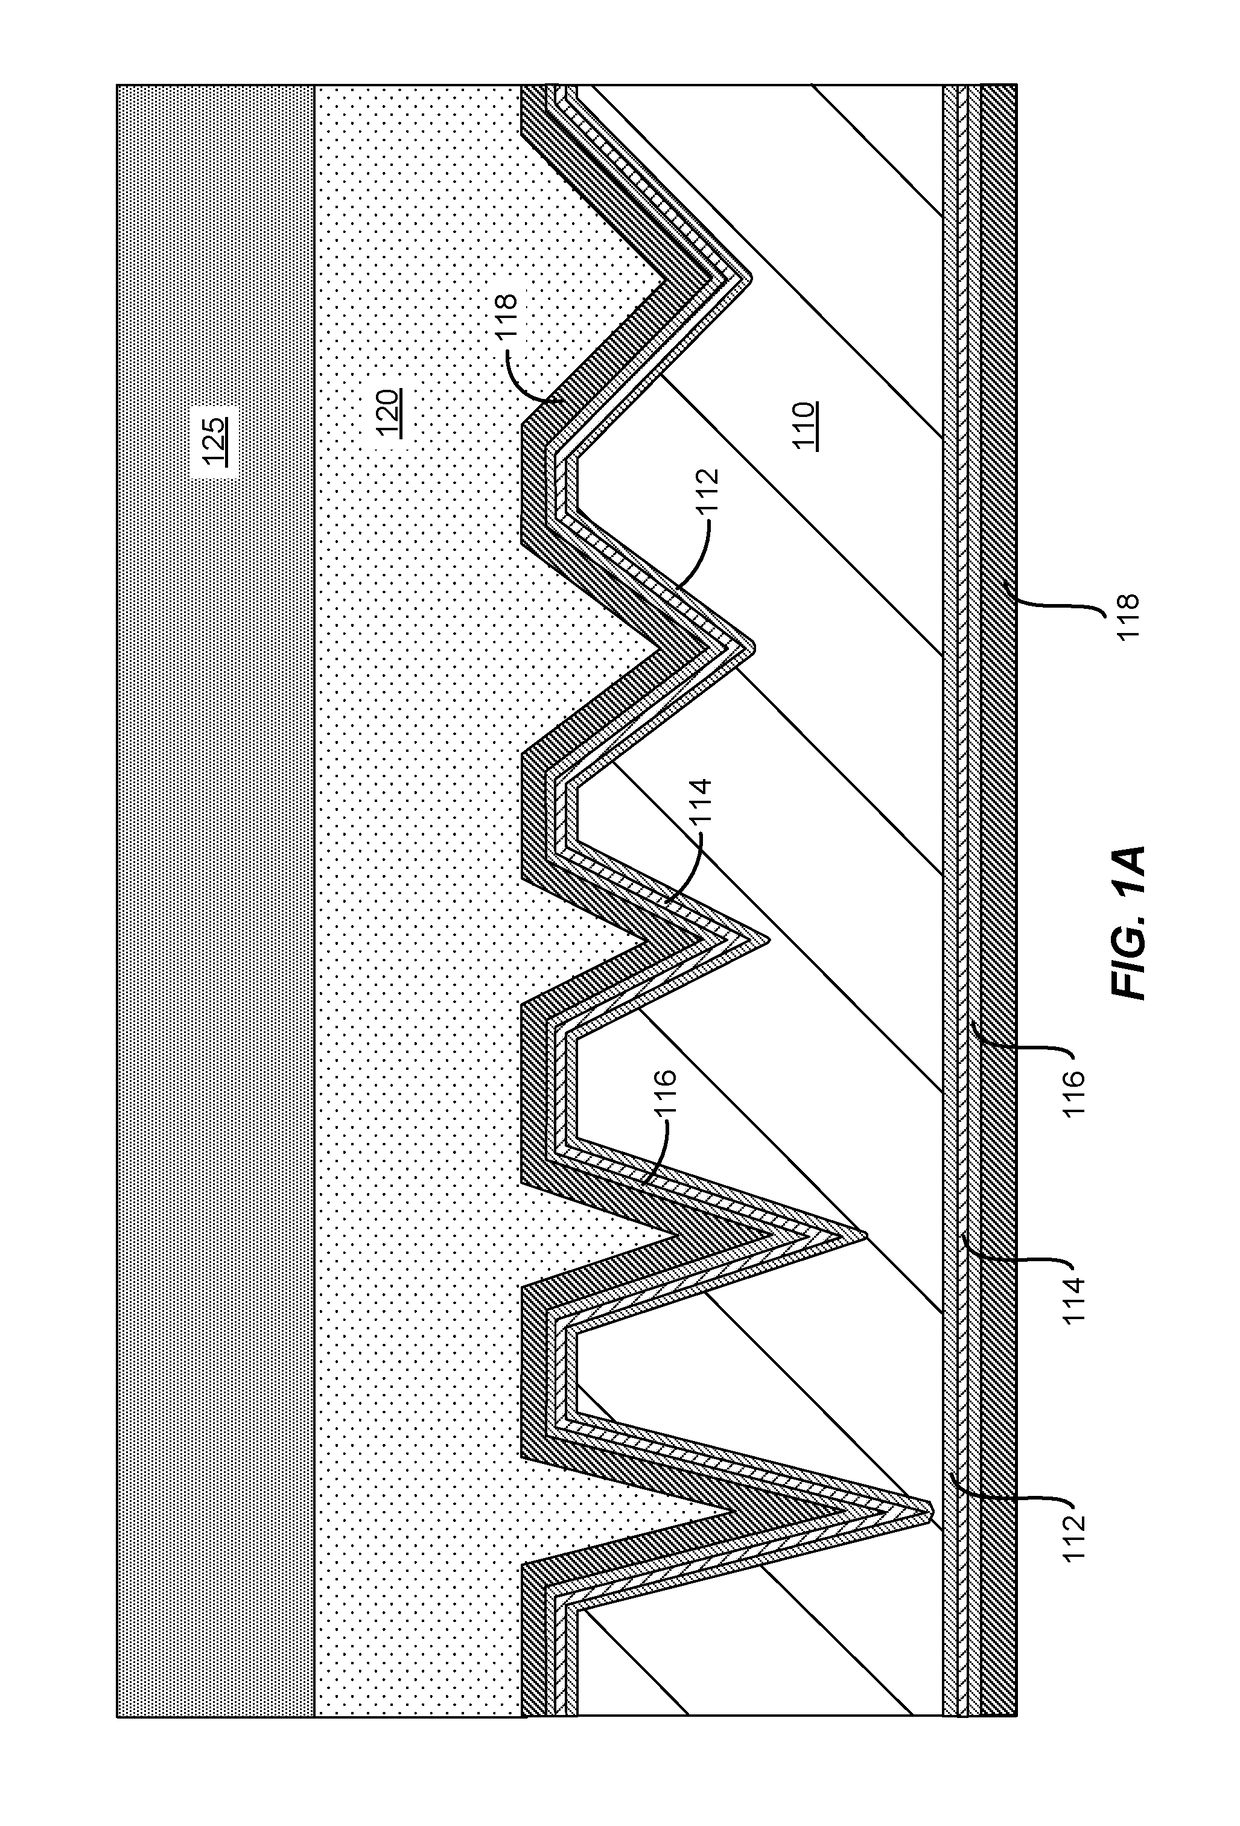 Polycrystalline ceramic substrate and method of manufacture